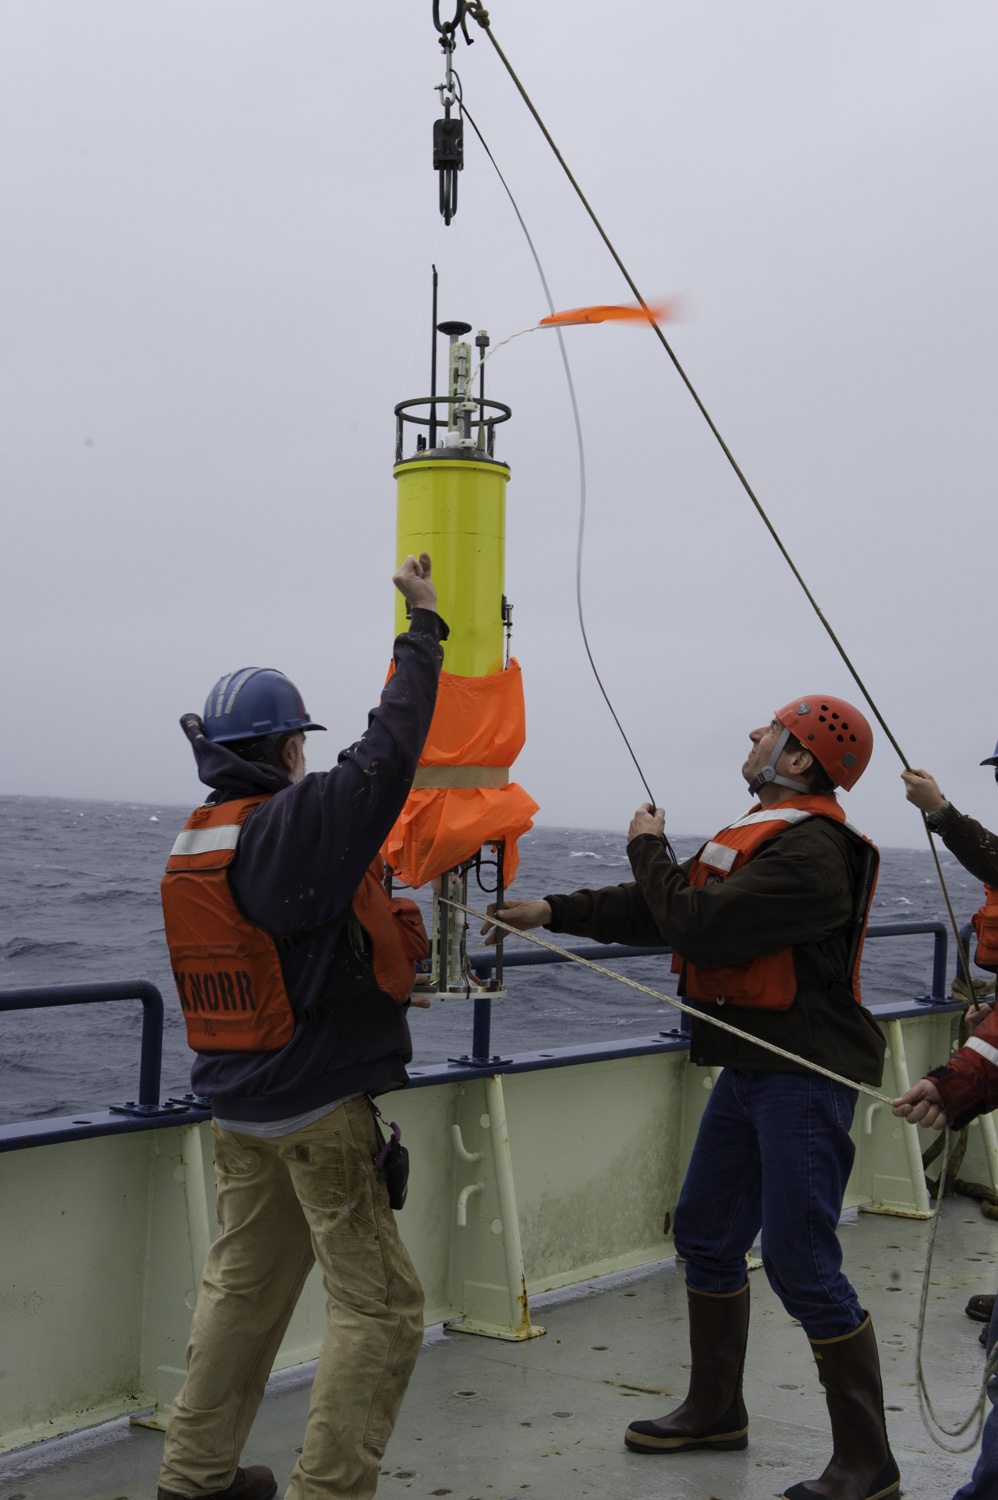 A research crew deployed a float from the R/V Knorr before releasing a fluorescent dye into the water. Scientists then tracked the drift of both dye and float through the Gulf Stream revealing significant mixing of waters across the swift current. Photo Credit: Craig M. Lee, UW APL. Click image to download hi-res version.